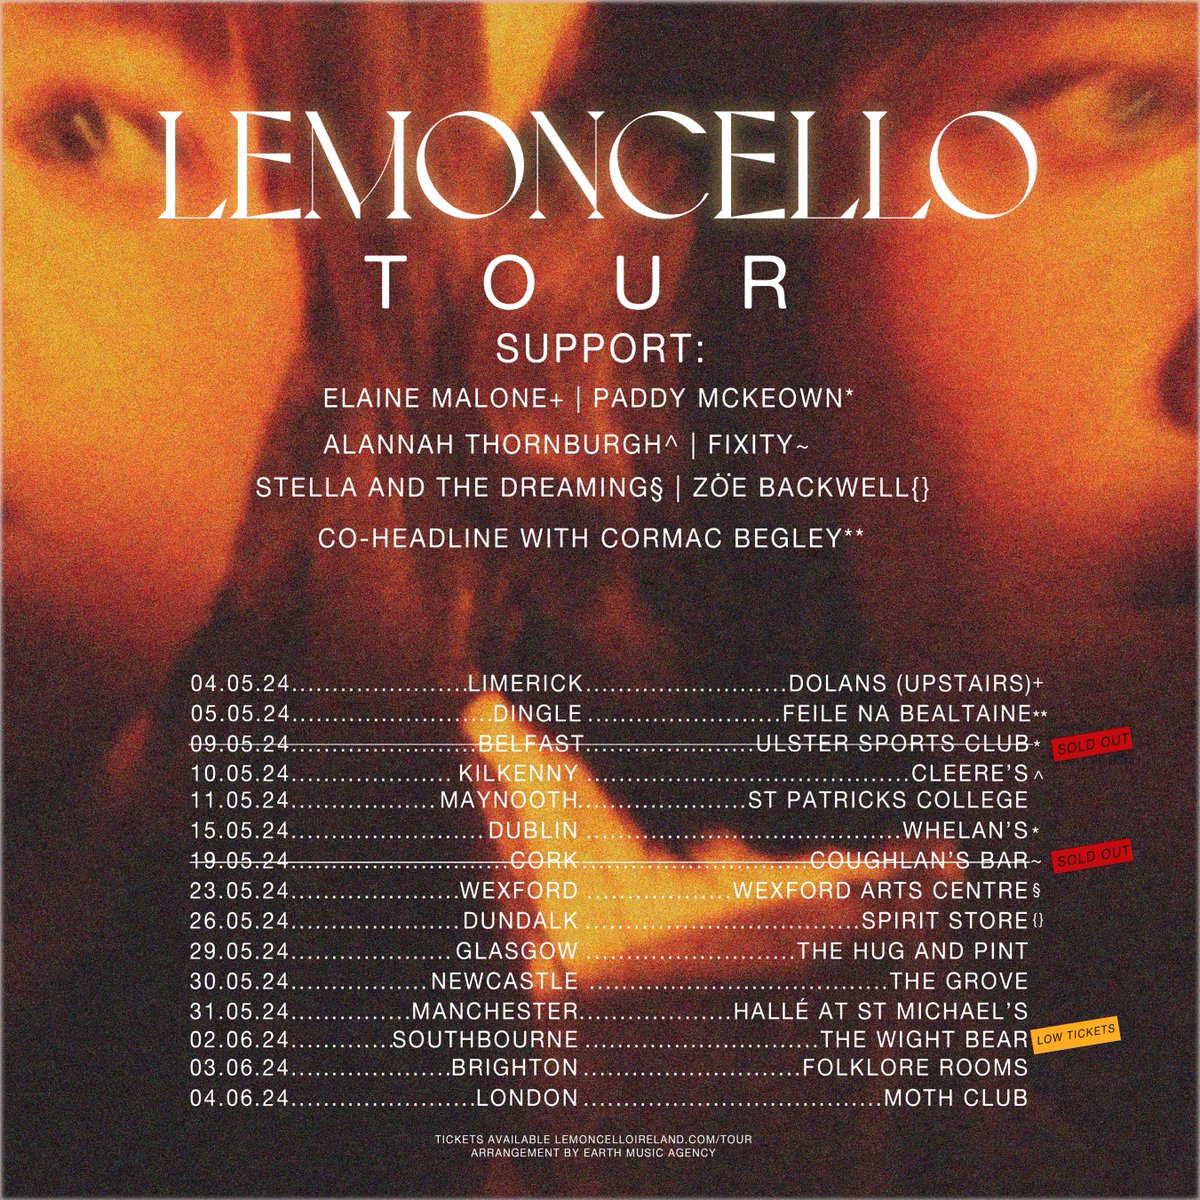 TOUR UPDATE ❗️ V happy to announce some extra dates and that these amazing artist that will be joining us on the Irish leg of our tour 🩵 Belfast and Cork are now sold out and Southbourne has 1 ticket left !! Do not miss out! we are so so excited💋 XO LC lemoncelloireland.com/tour